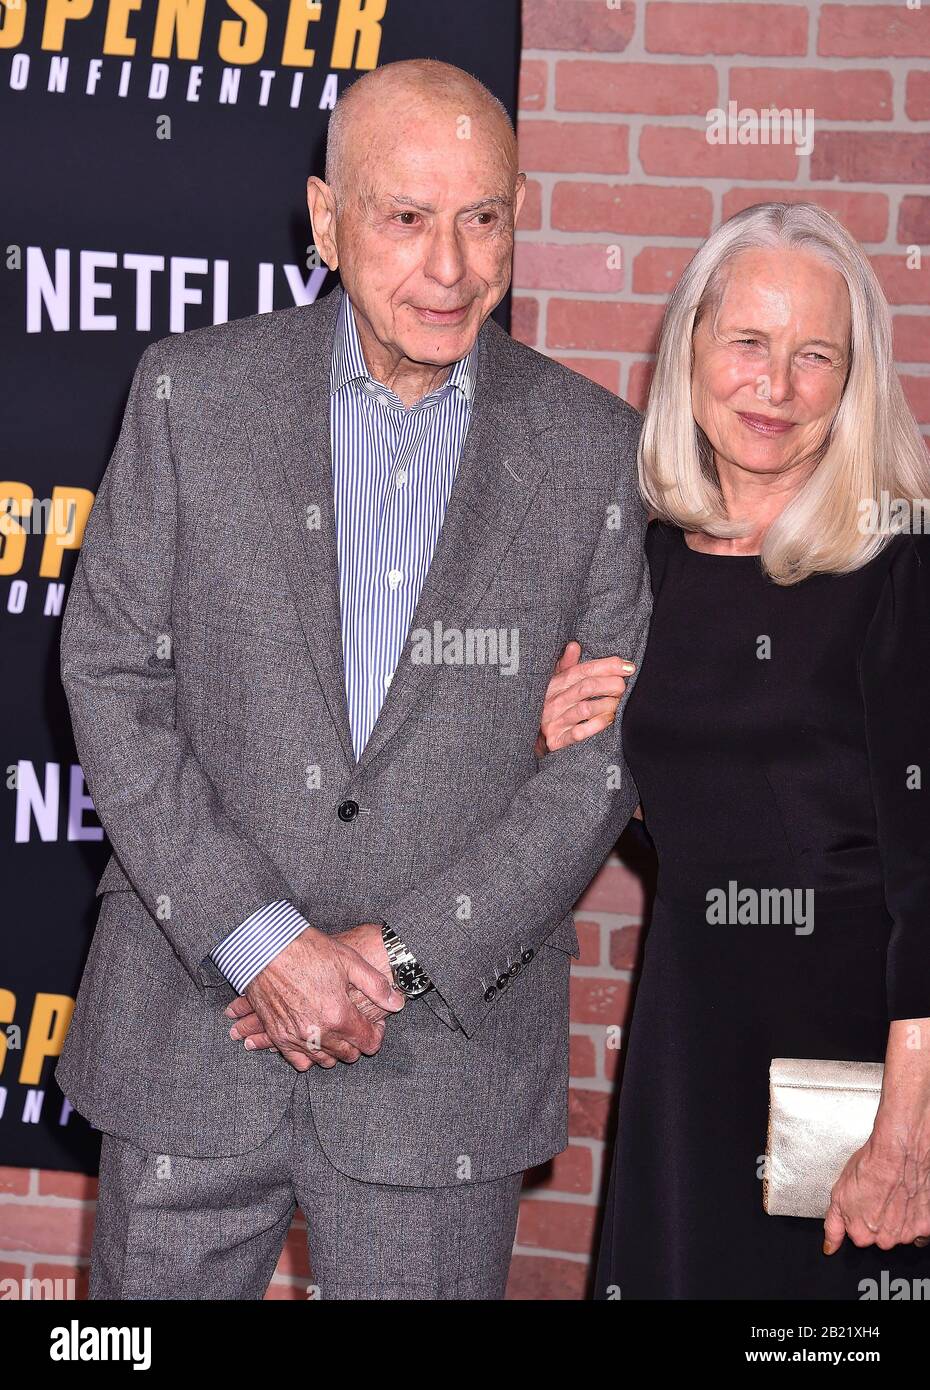 WESTWOOD, CA - FEBRUARY 27: Alan Arkin and Suzanne Newlander Arkin attend the Premiere of Netflix's 'Spenser Confidential' at Regency Village Theatre on February 27, 2020 in Westwood, California. Stock Photo